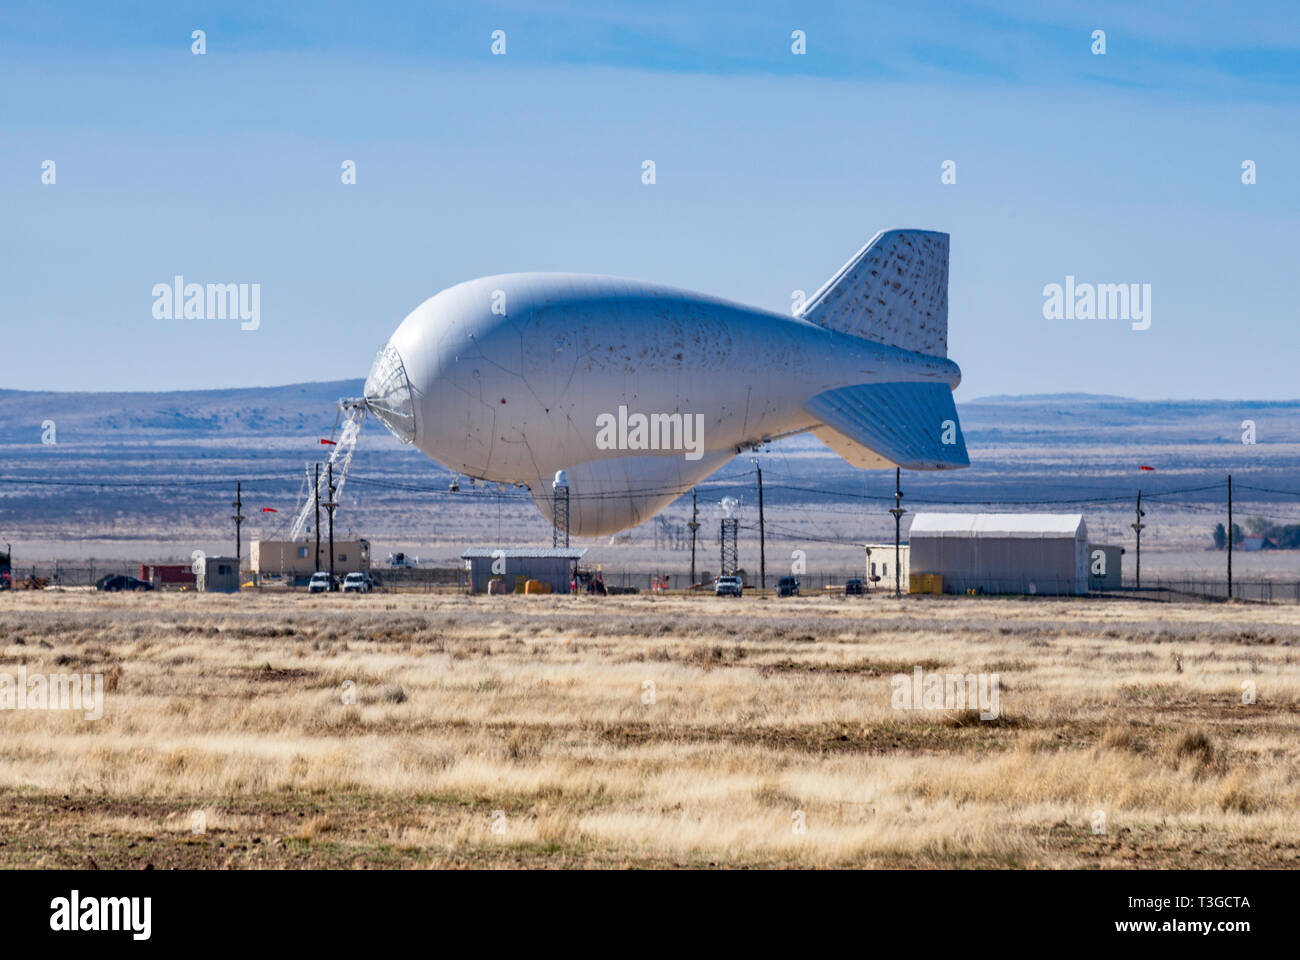 Aerostat surveillance blimp with downward-looking radar for drug smugglers aircraft detection, low on ground due to strong winds, near Marfa, Texas Stock Photo